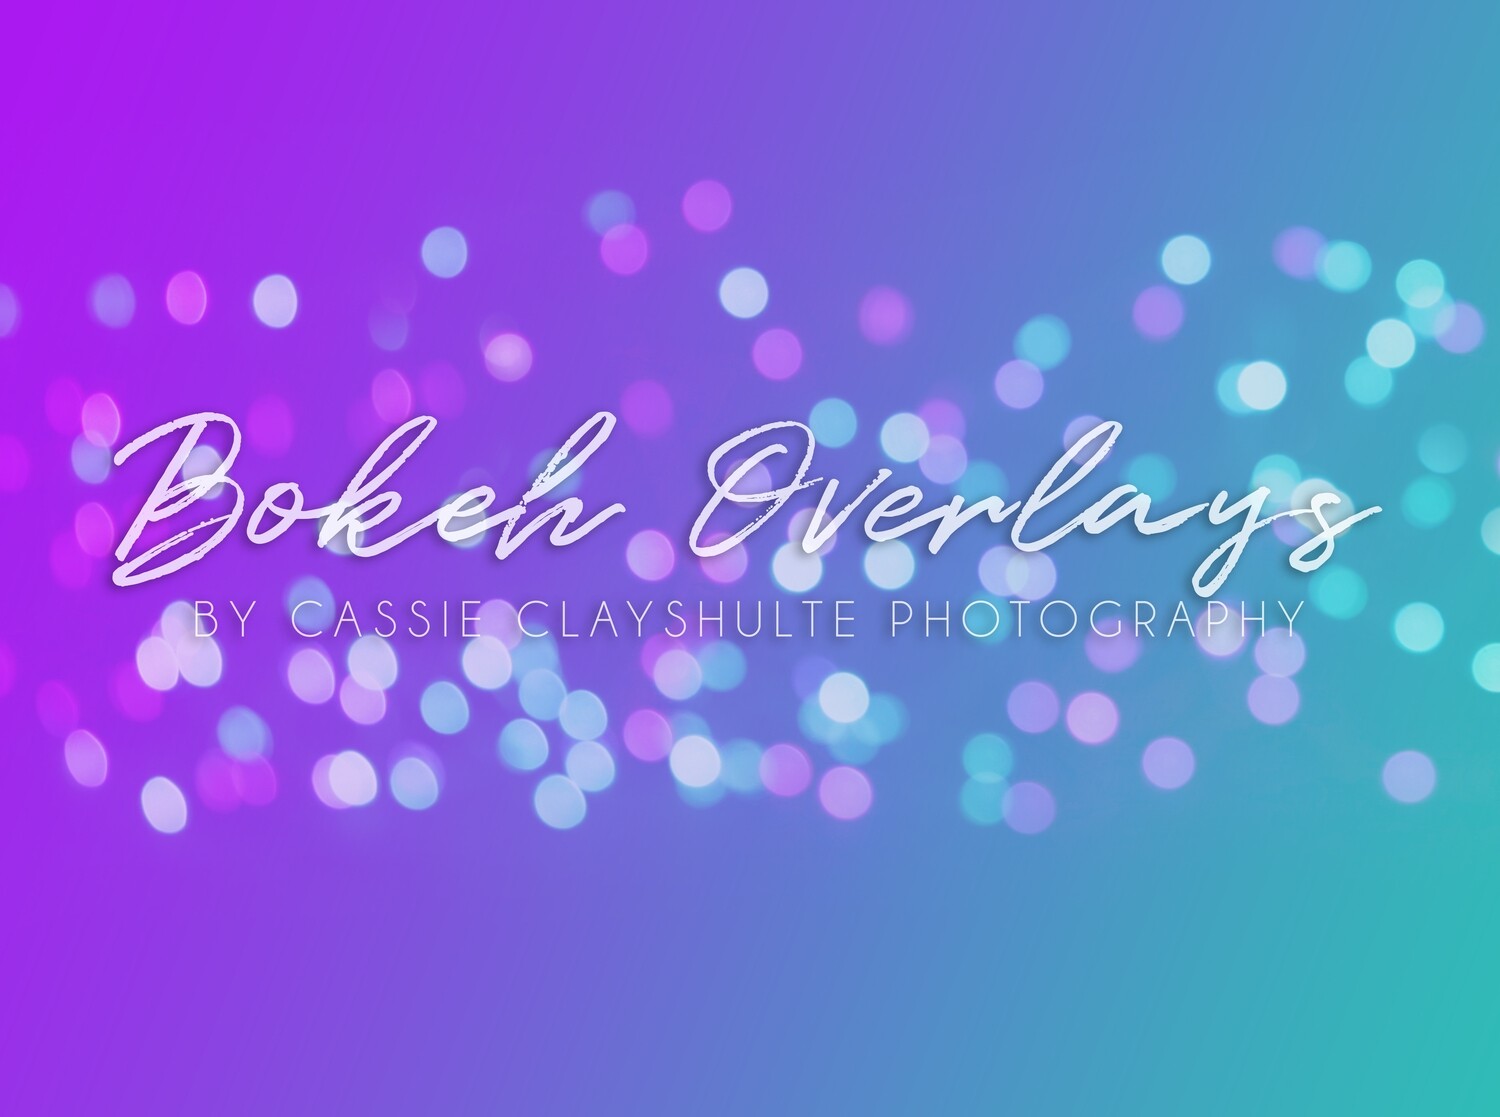 Bokeh Overlays by Cassie Clayshulte Photography